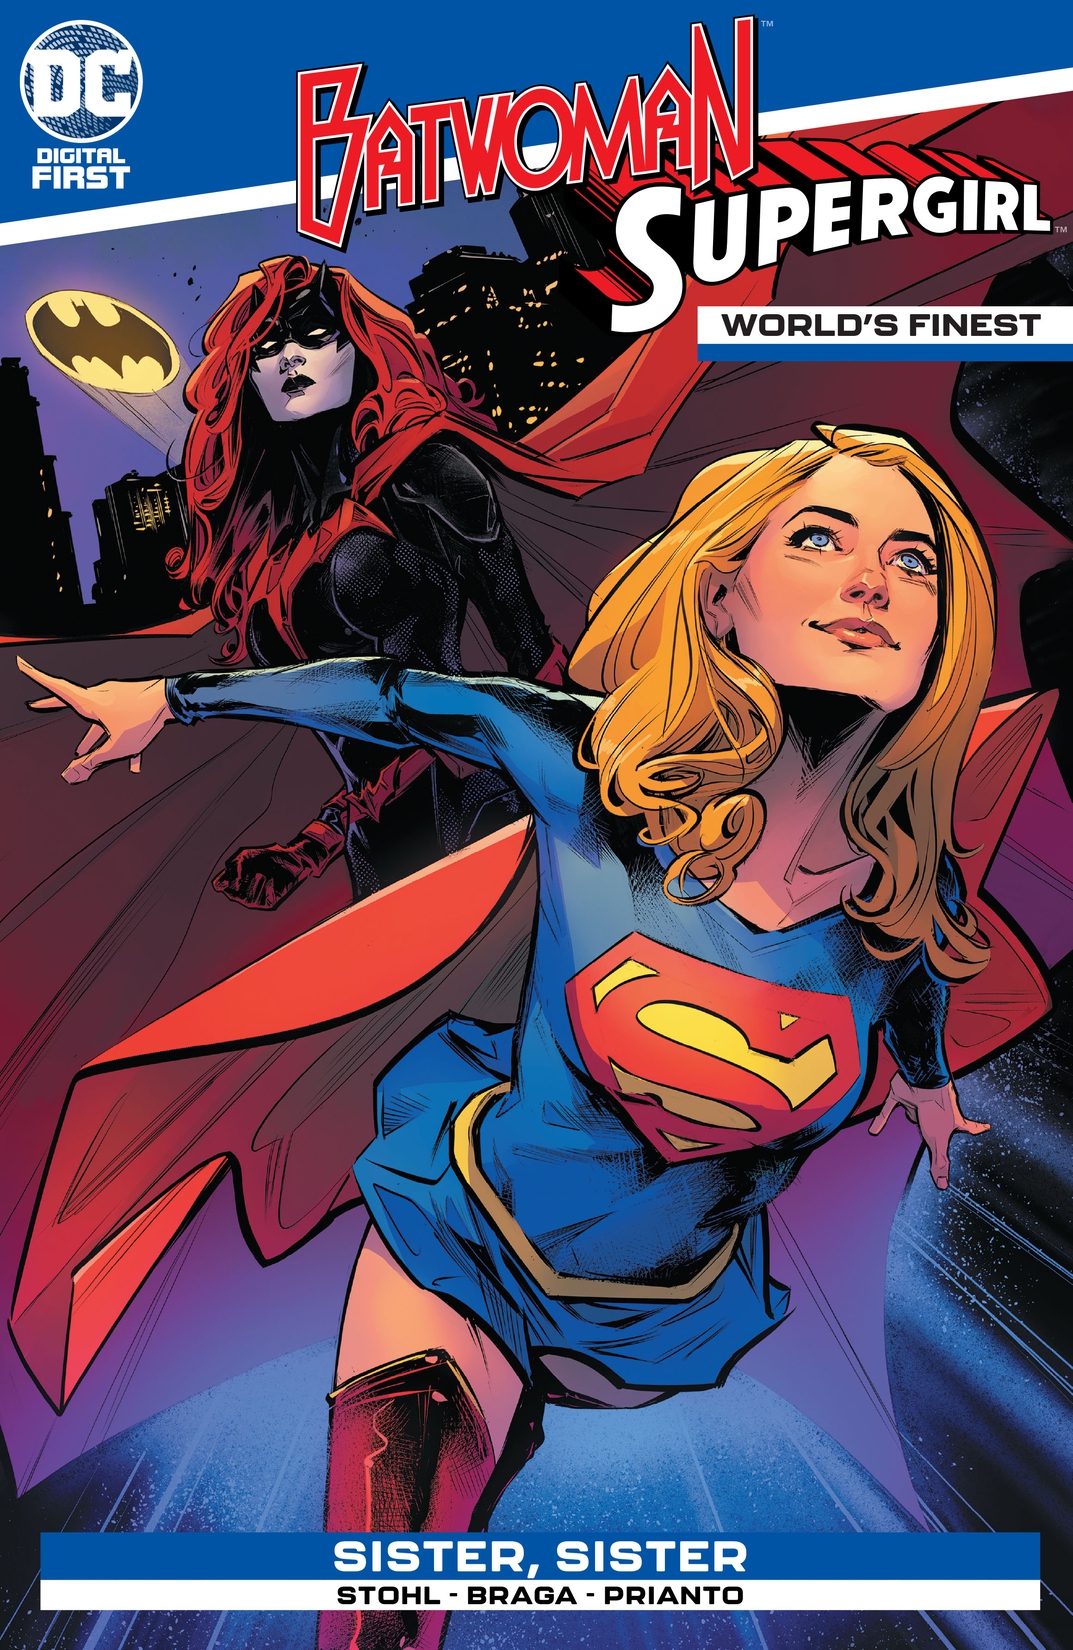 World’s Finest: Batwoman and Supergirl #1 preview images